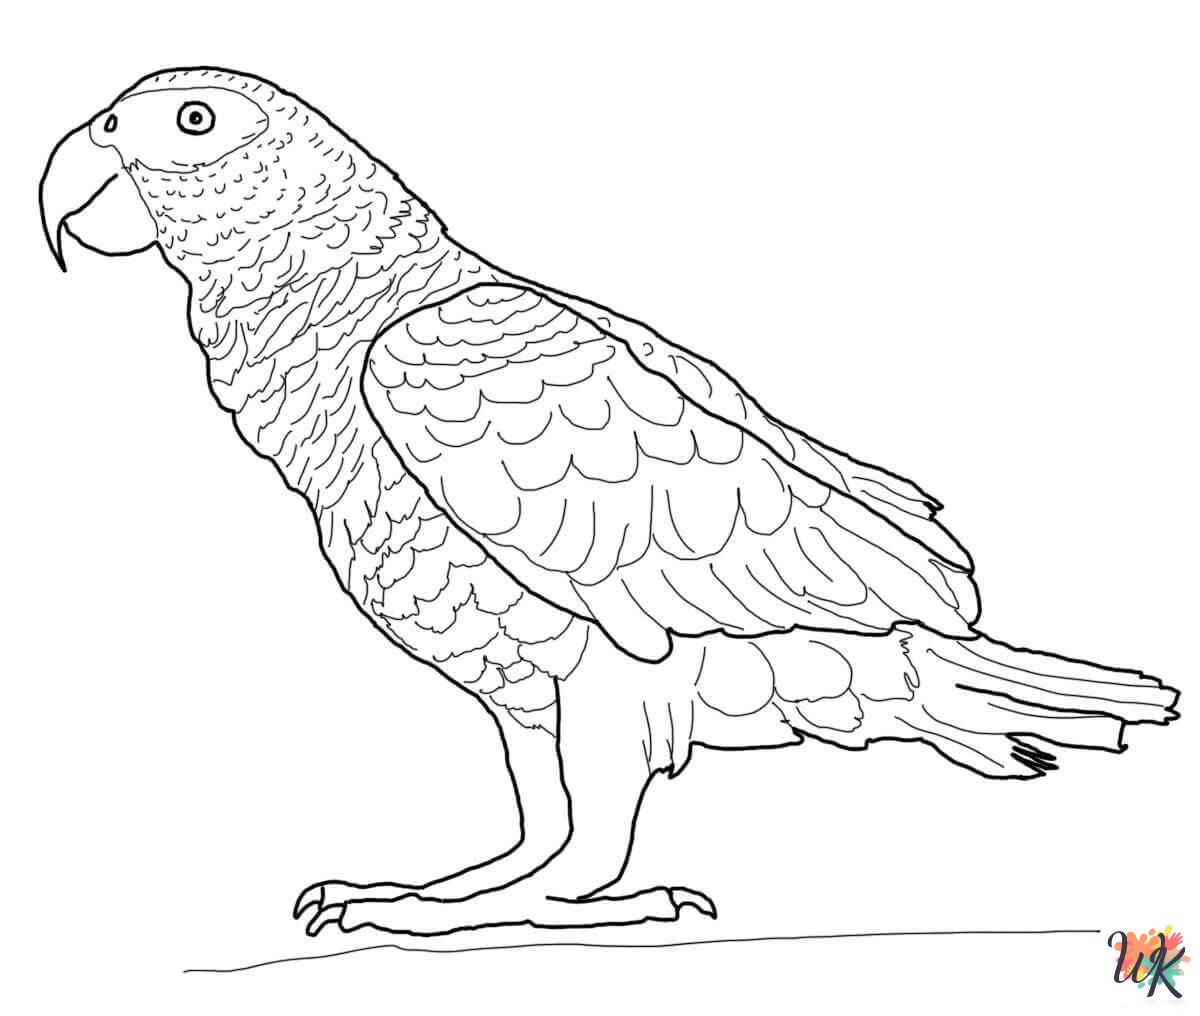 Parrot coloring pages free